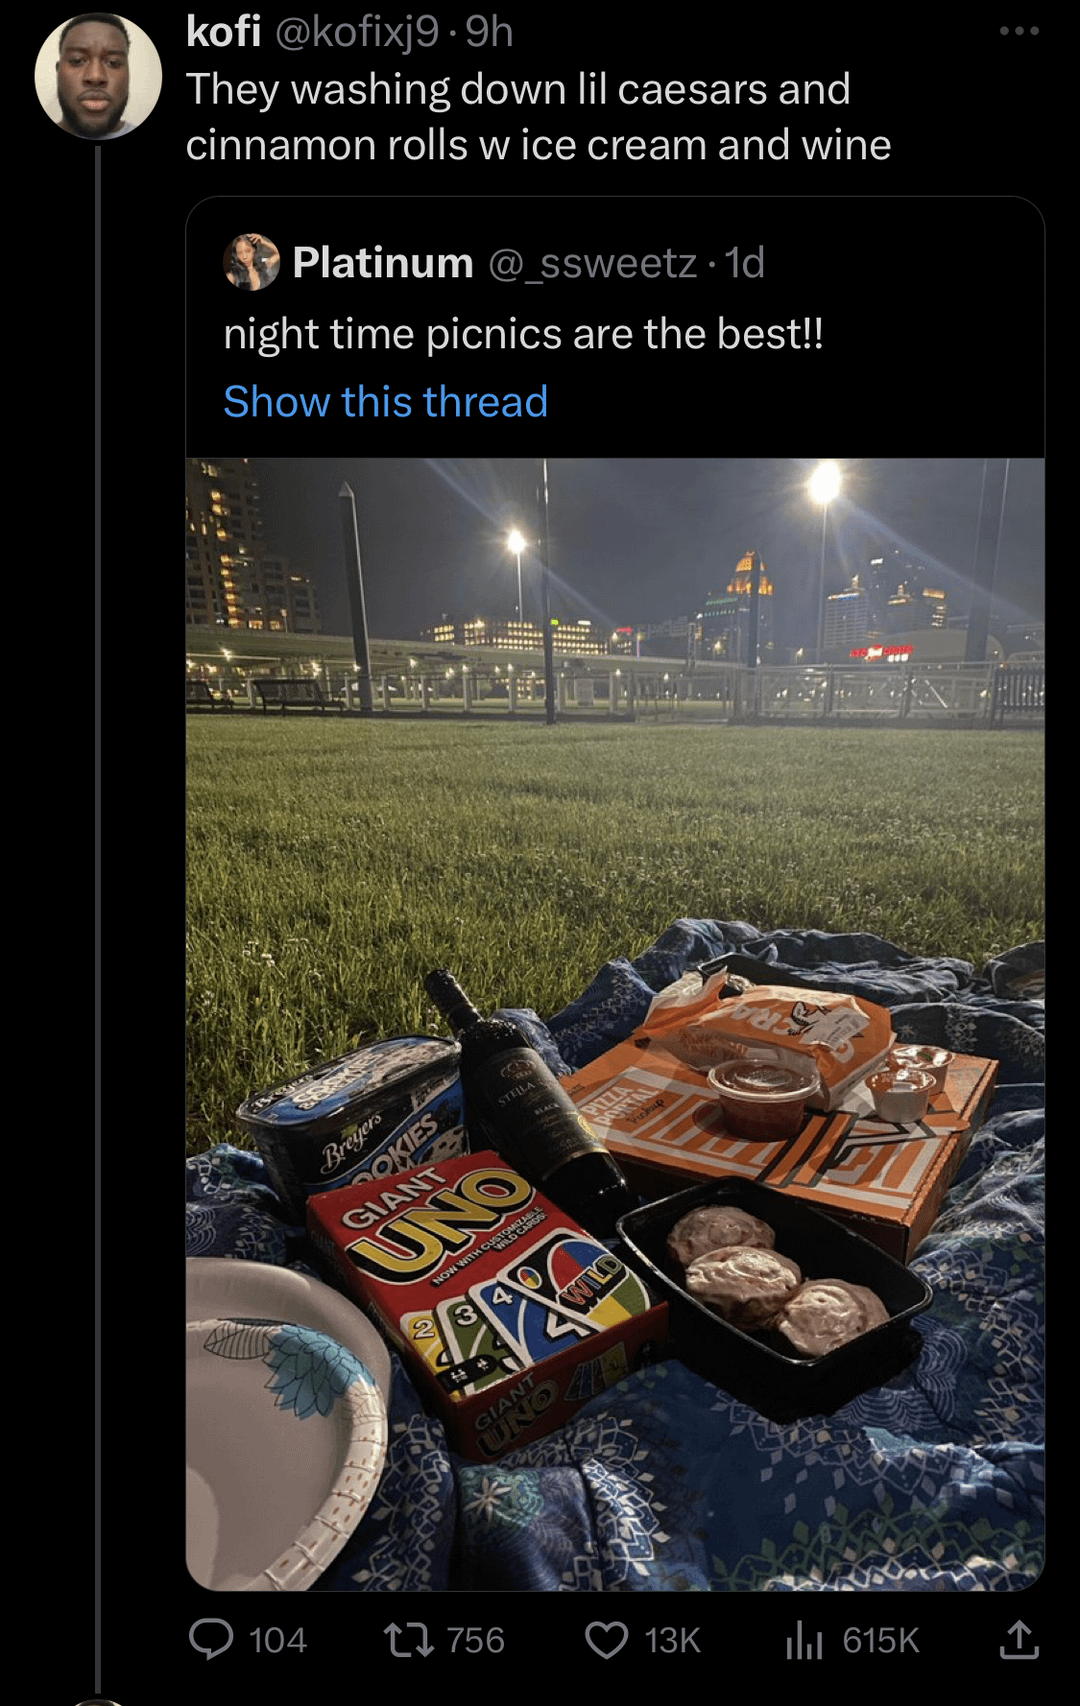 funny tweets and twitter memes - poster - kofi They washing down lil caesars and cinnamon rolls w ice cream and wine Platinum @ ssweetz1d night time picnics are the best!! Show this thread Pokies Giant Reft B po 104 13 756 Wwan 13K il